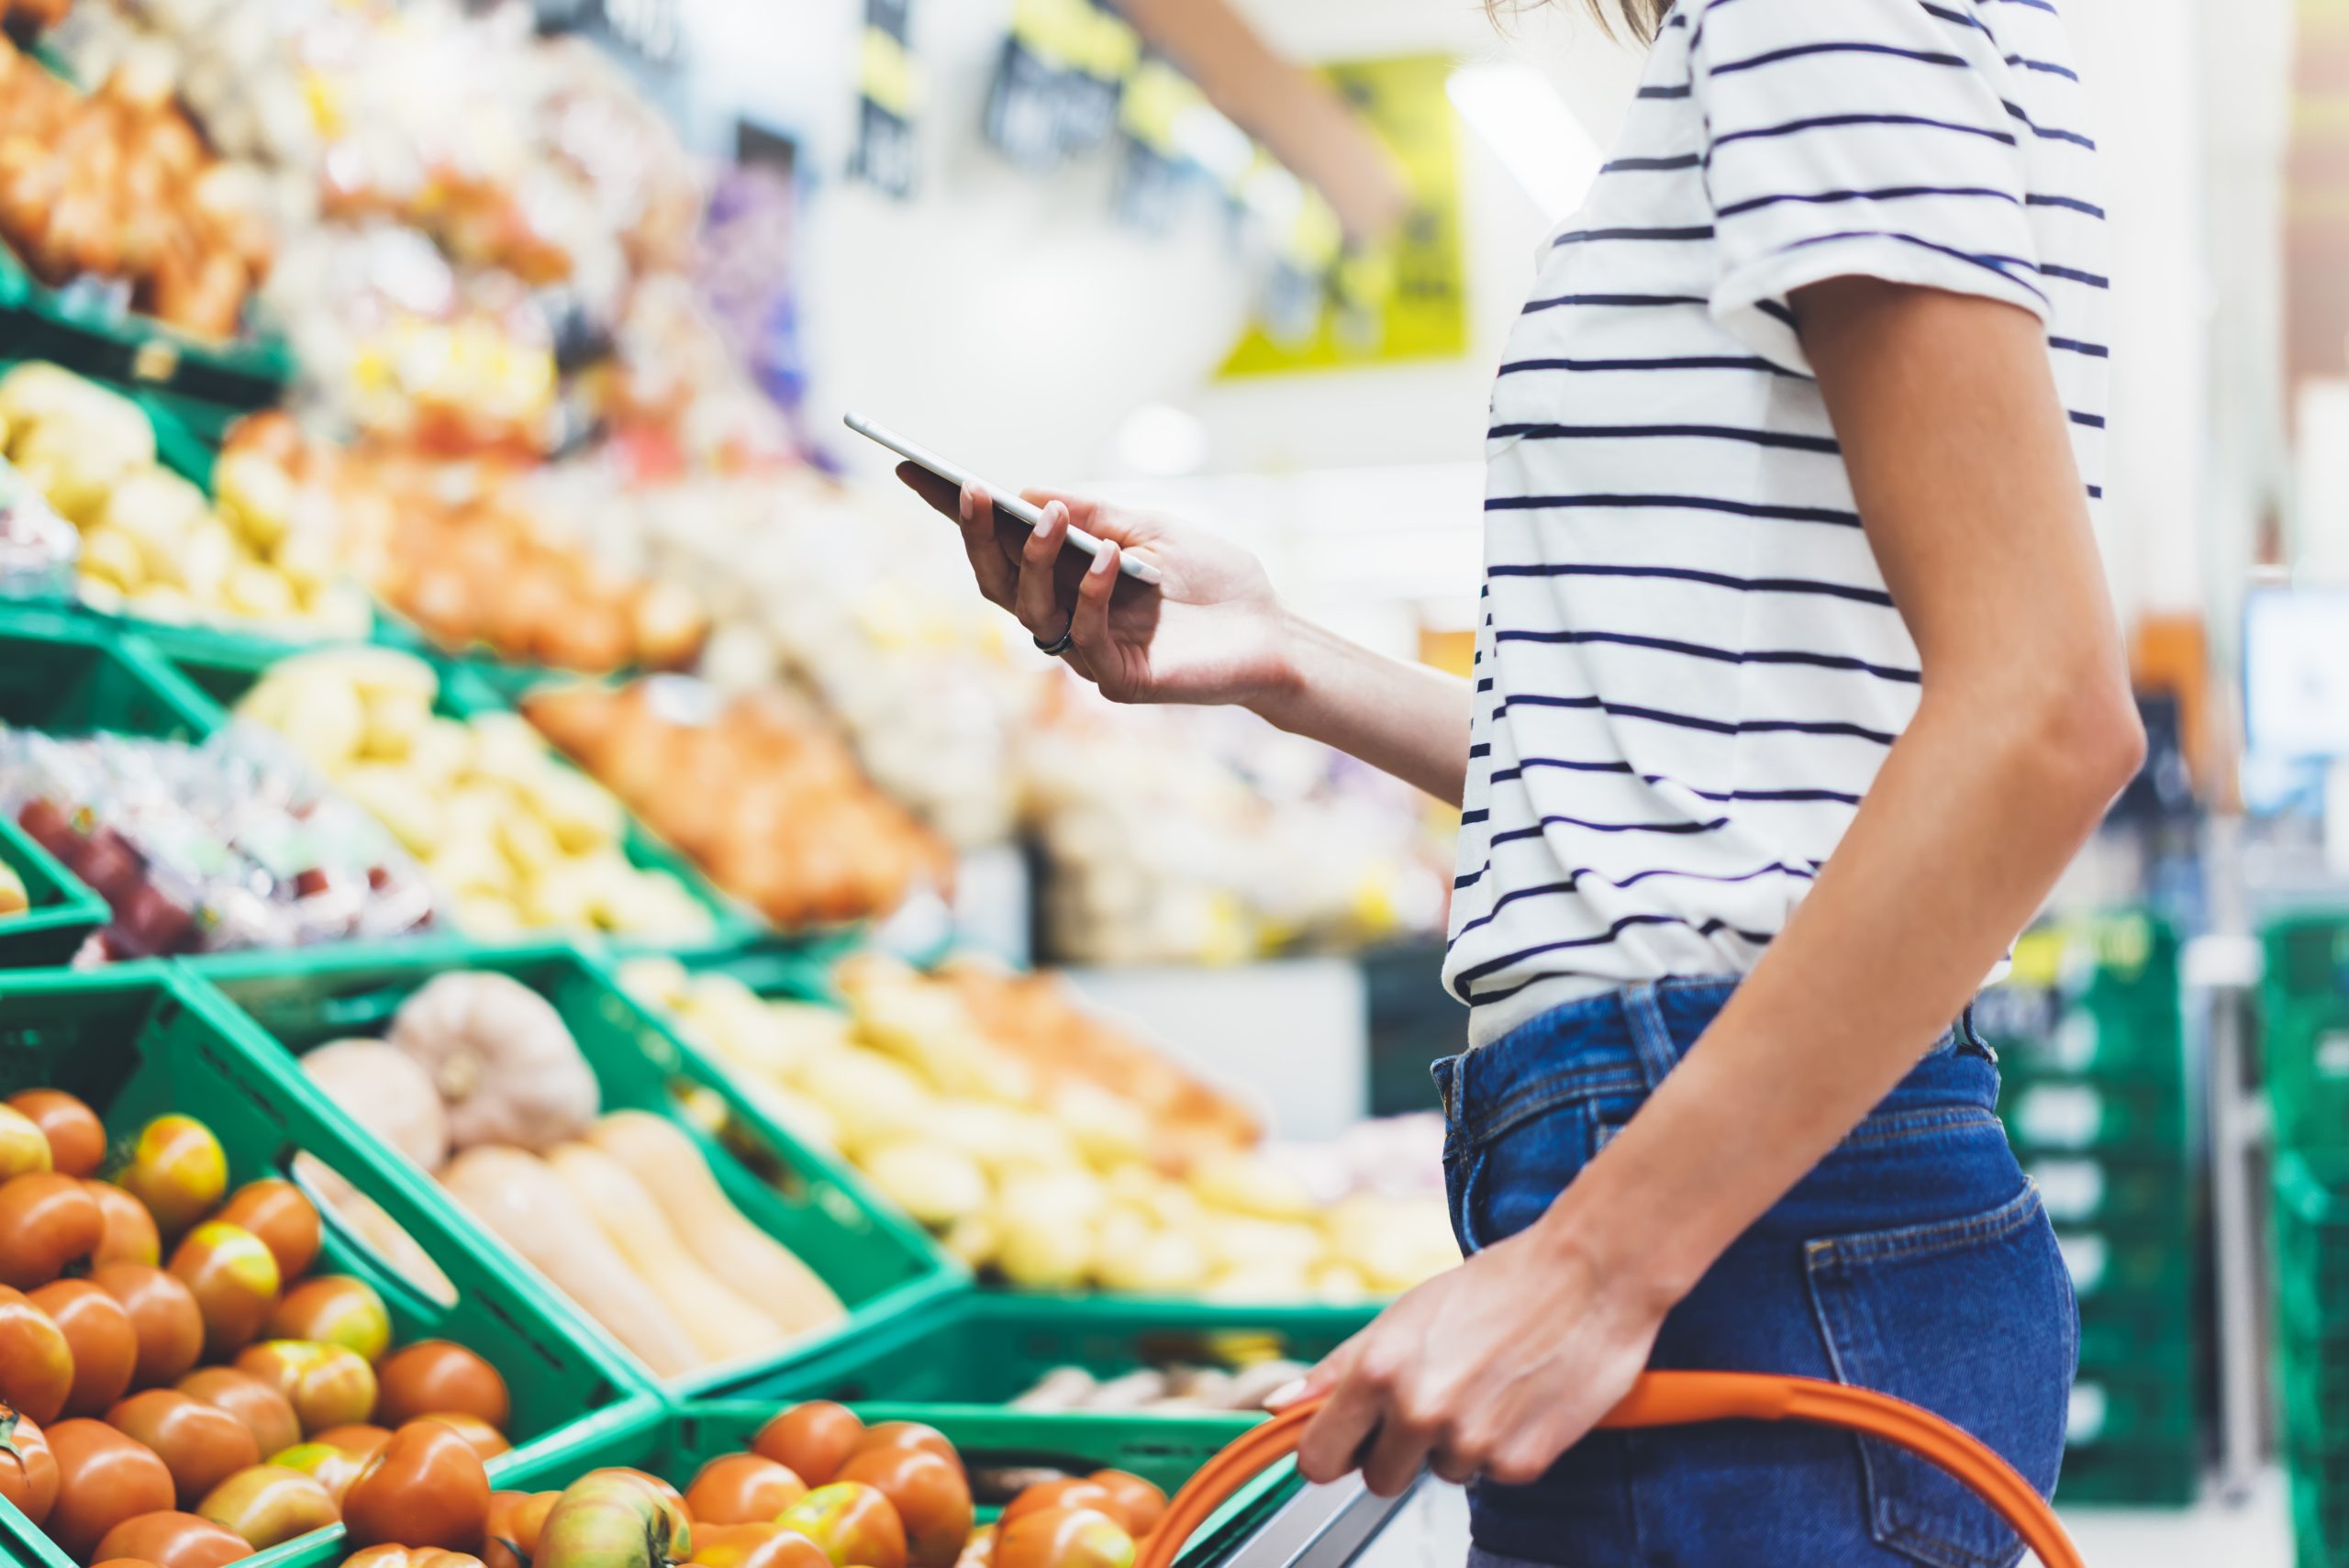 Consumers shopping for groceries little and often: Kantar